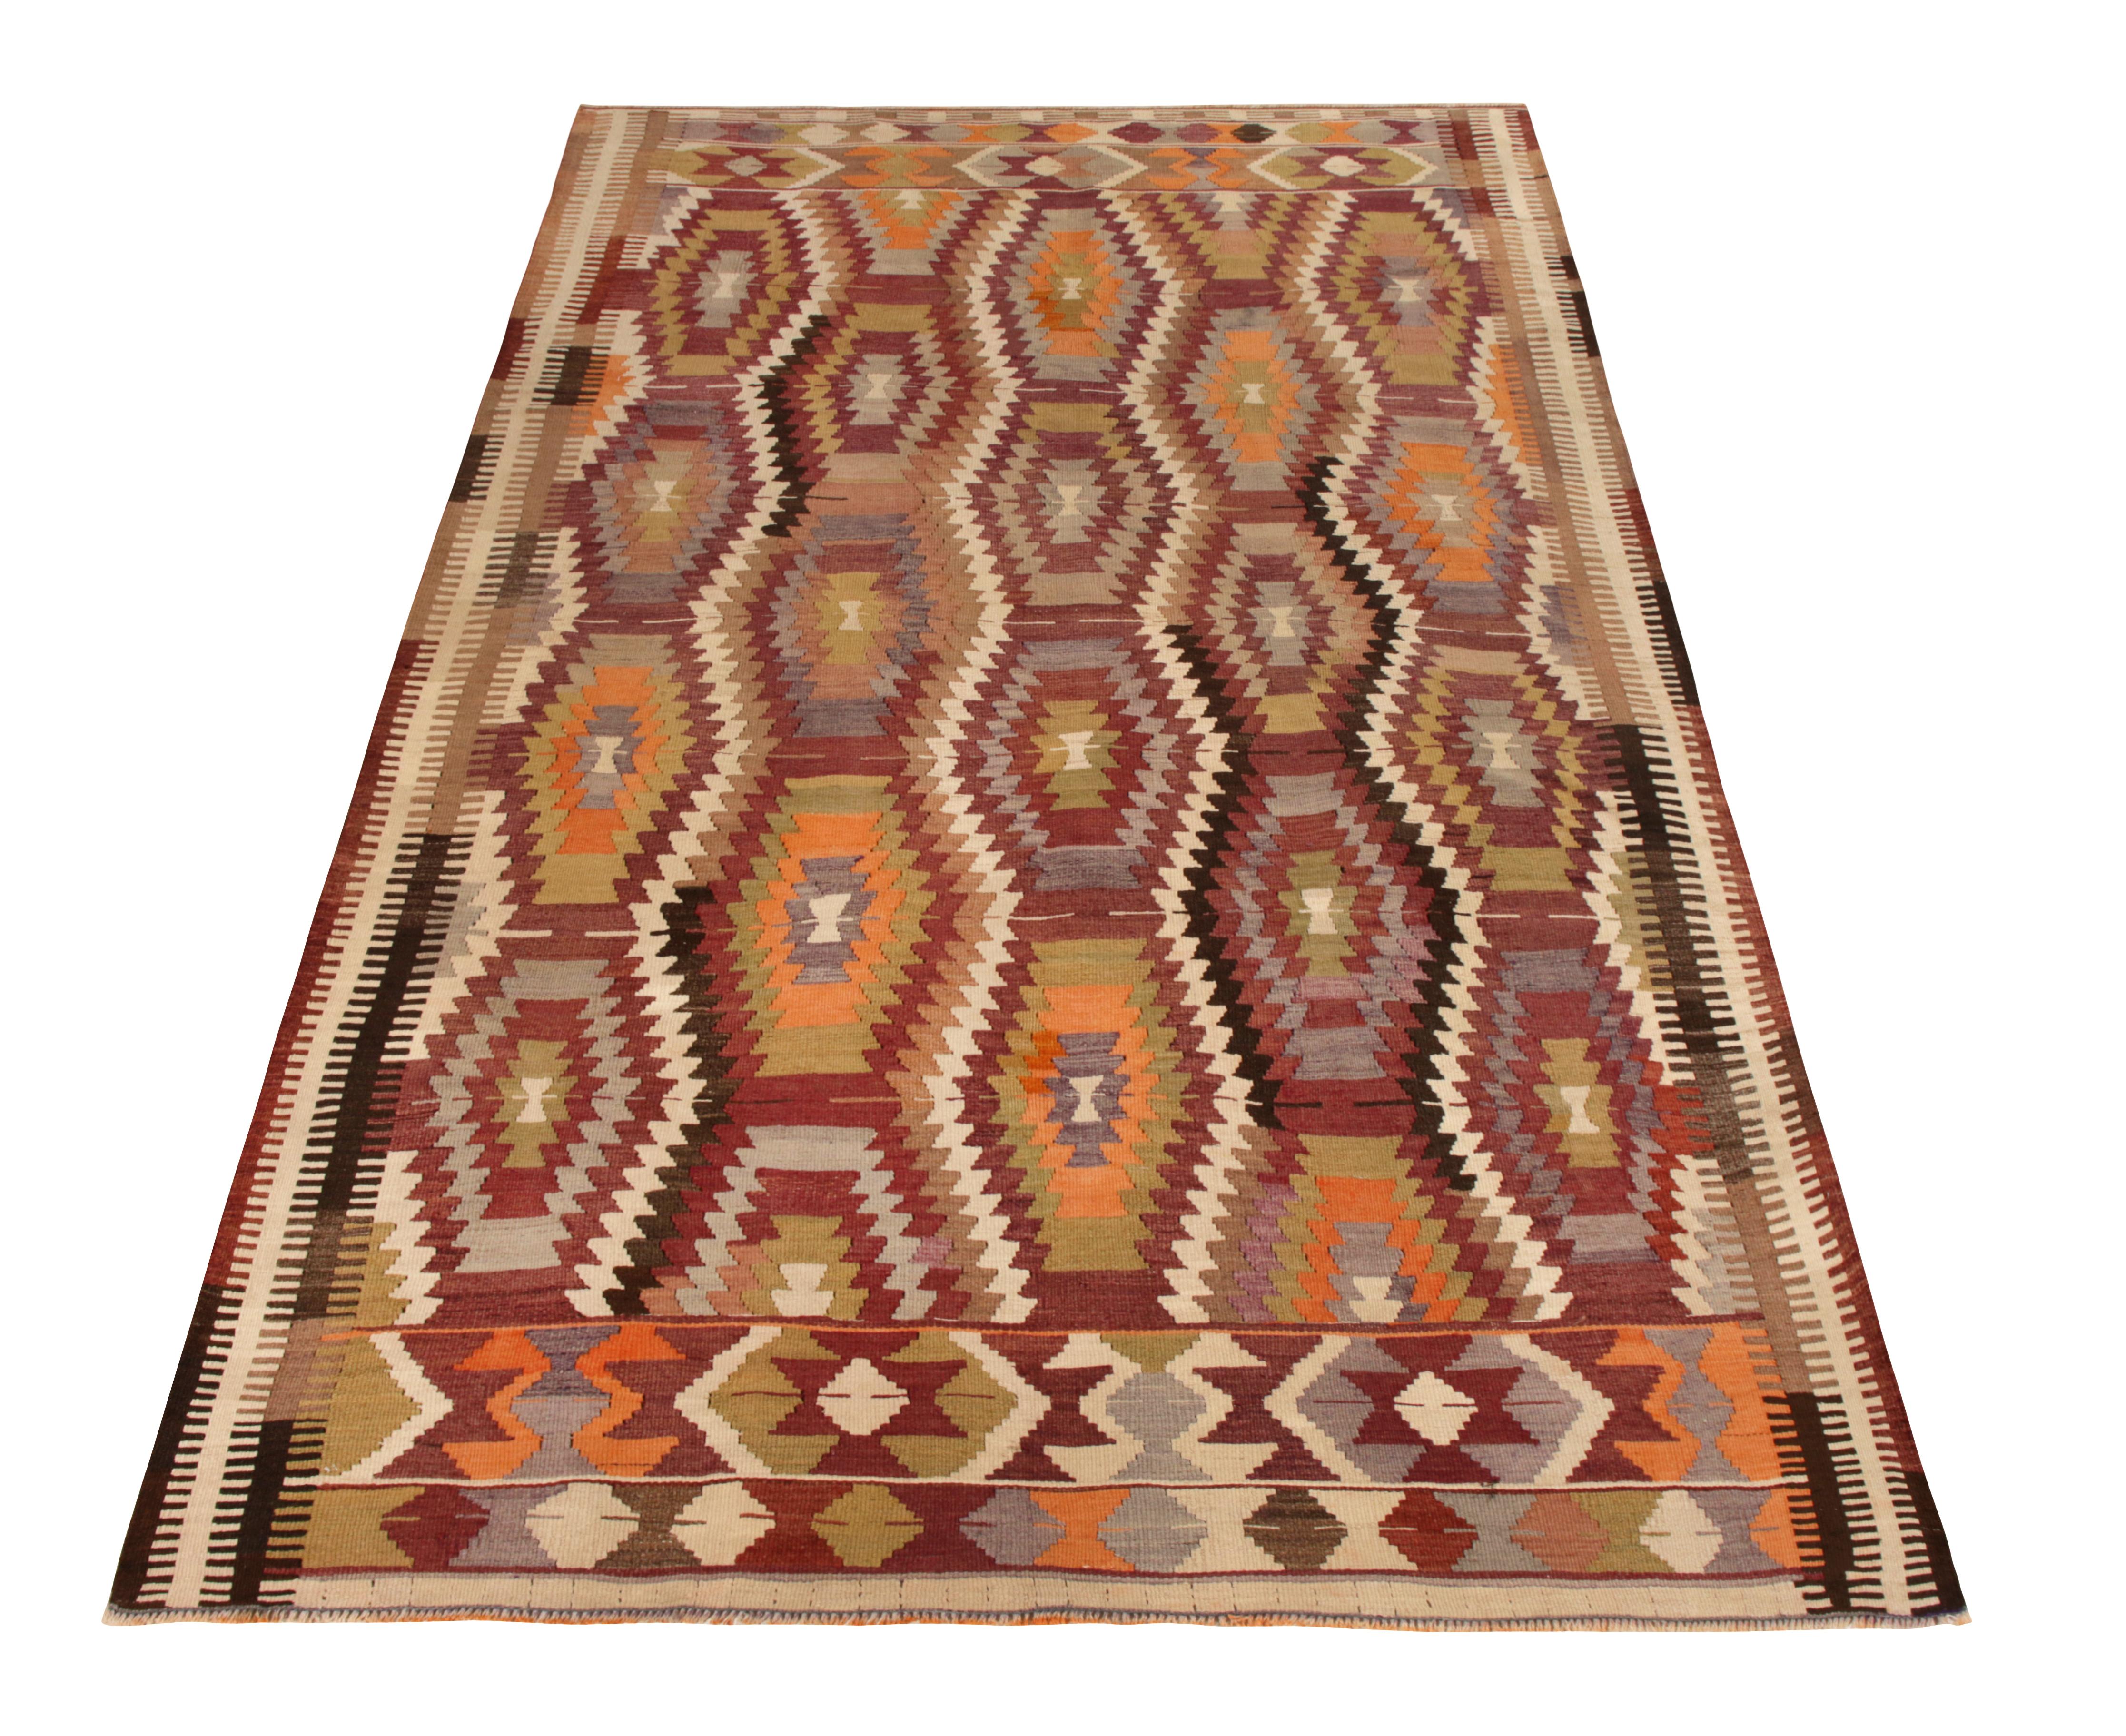 Connoting the 1950s-1960s Turkish Antalya style, this 5x9 vintage Kilim rug joins the mid-century selections in Rug & Kilim’s renowned Kilim & Flat Weave lines. Handwoven in wool, this tribal Kilim style stands out in a bold all over geometric